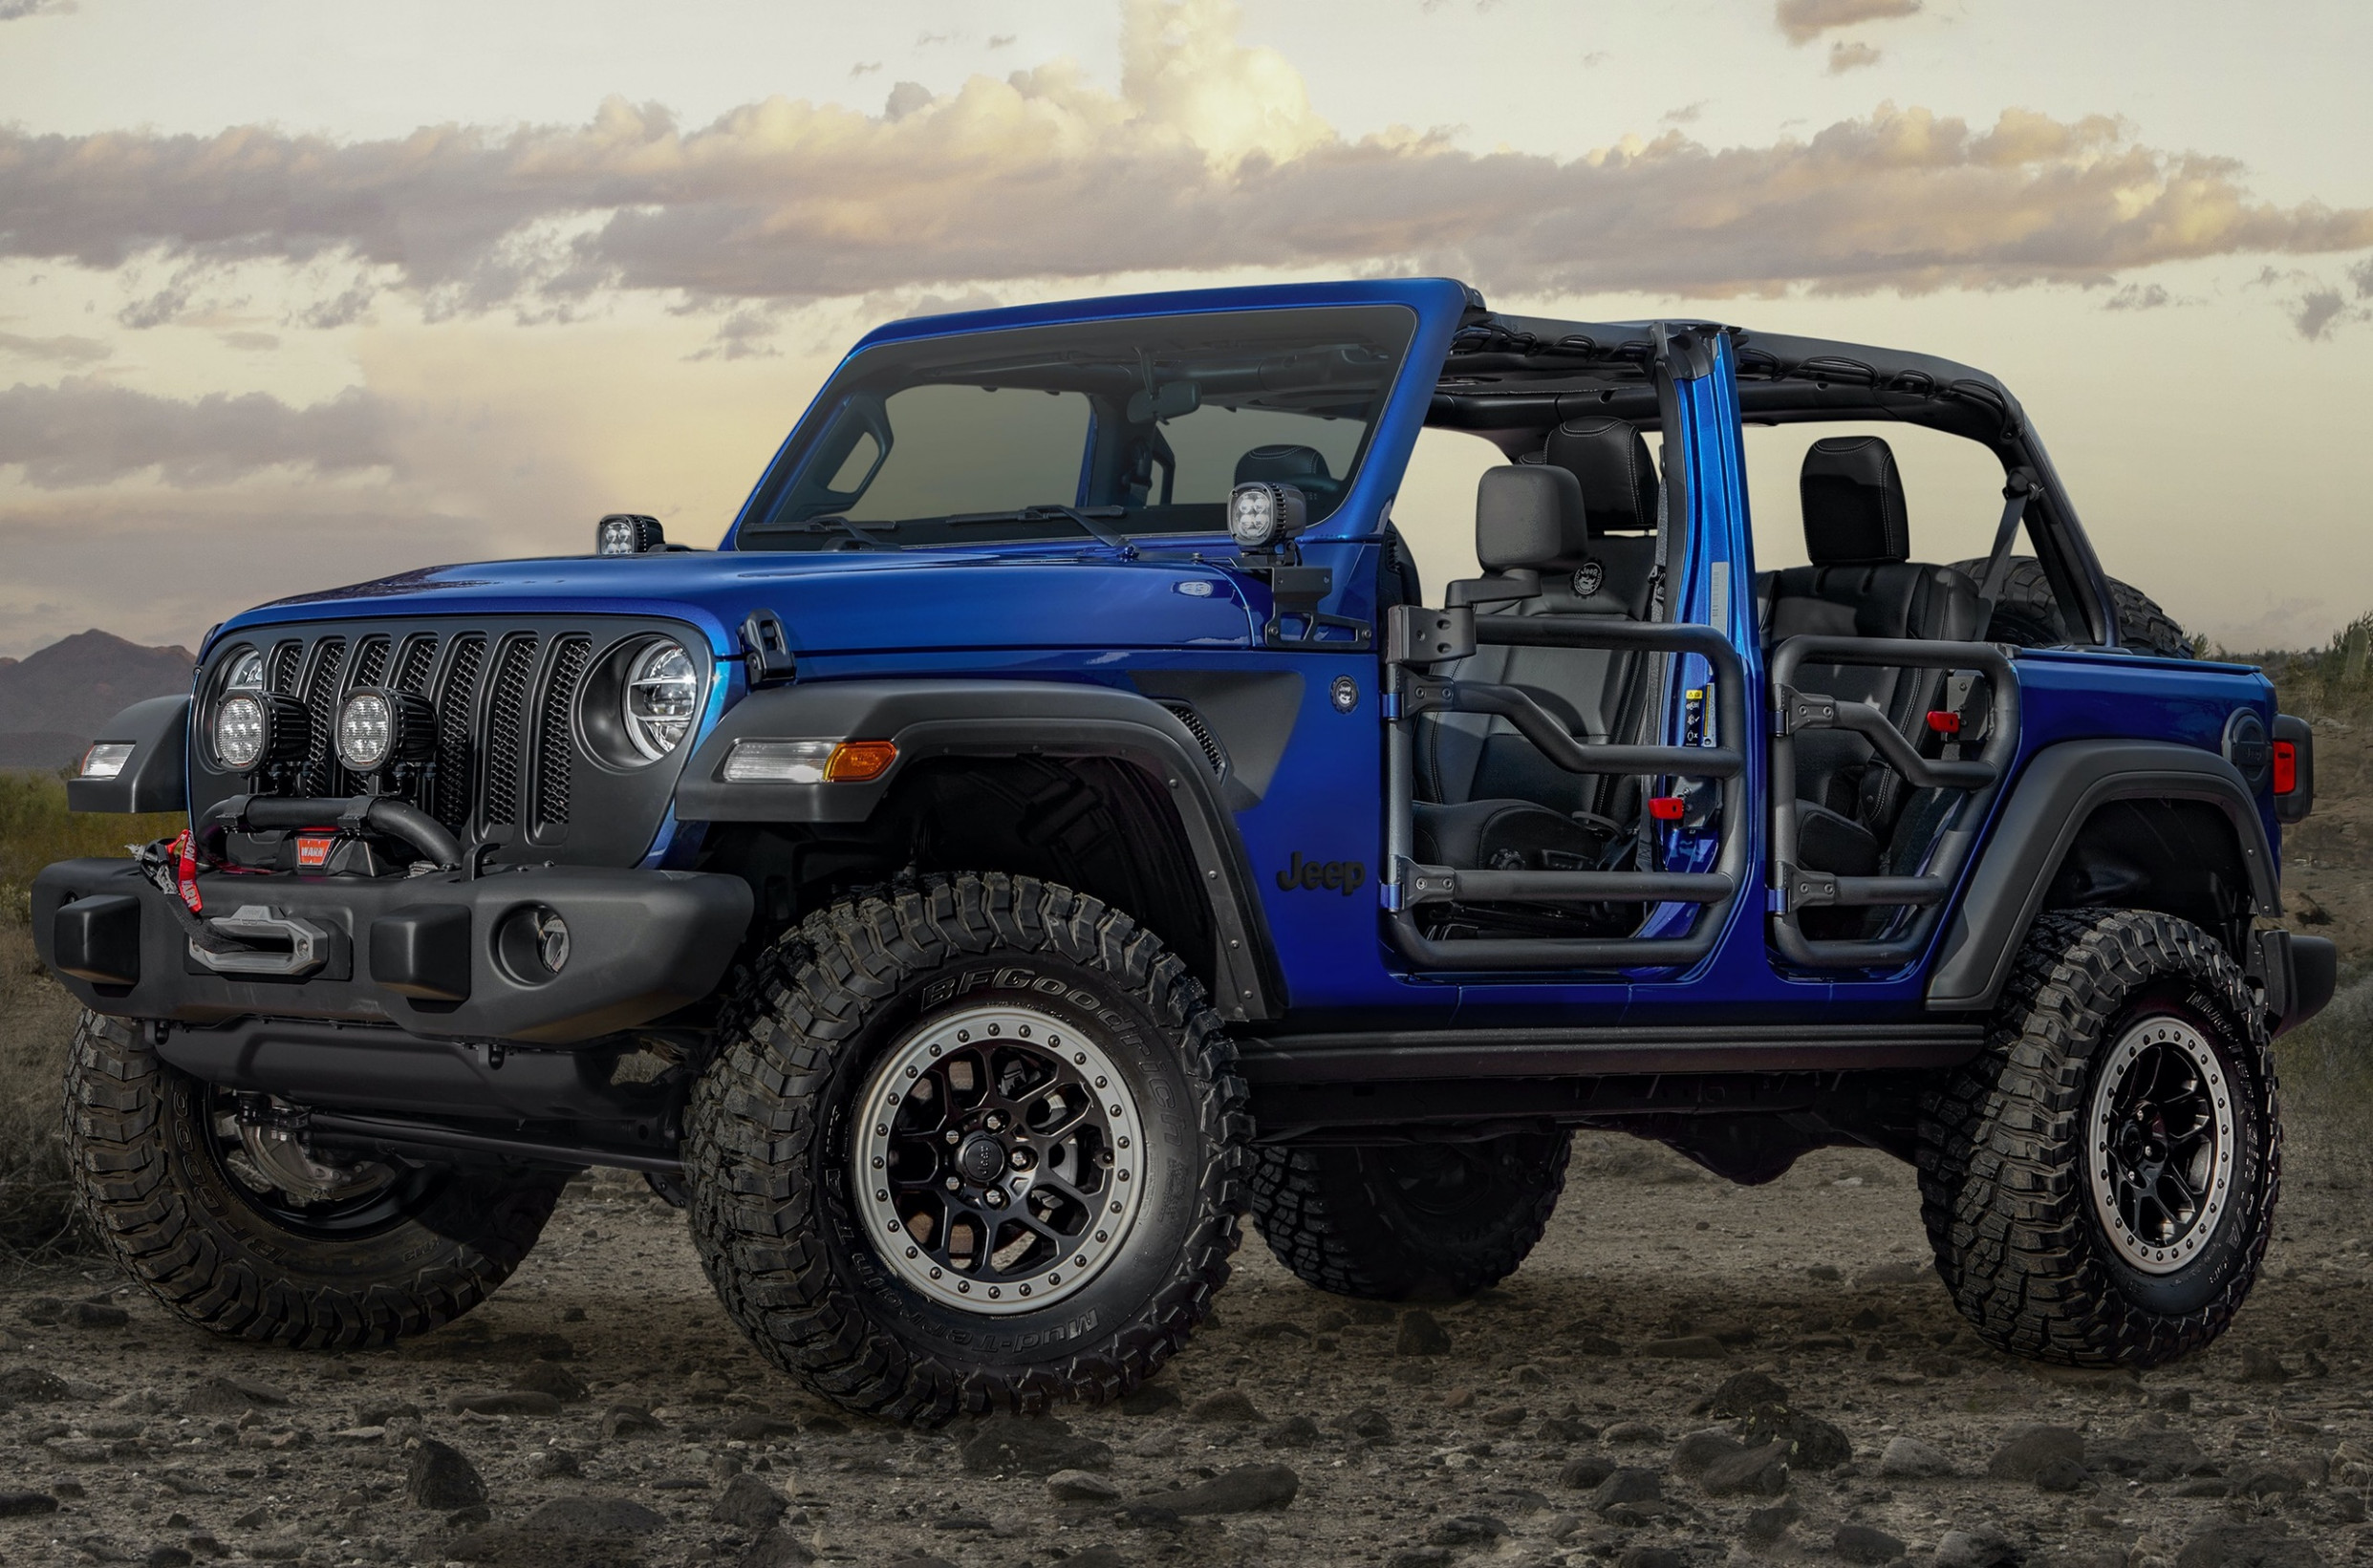 Redesign and Concept 2022 Jeep Patriot